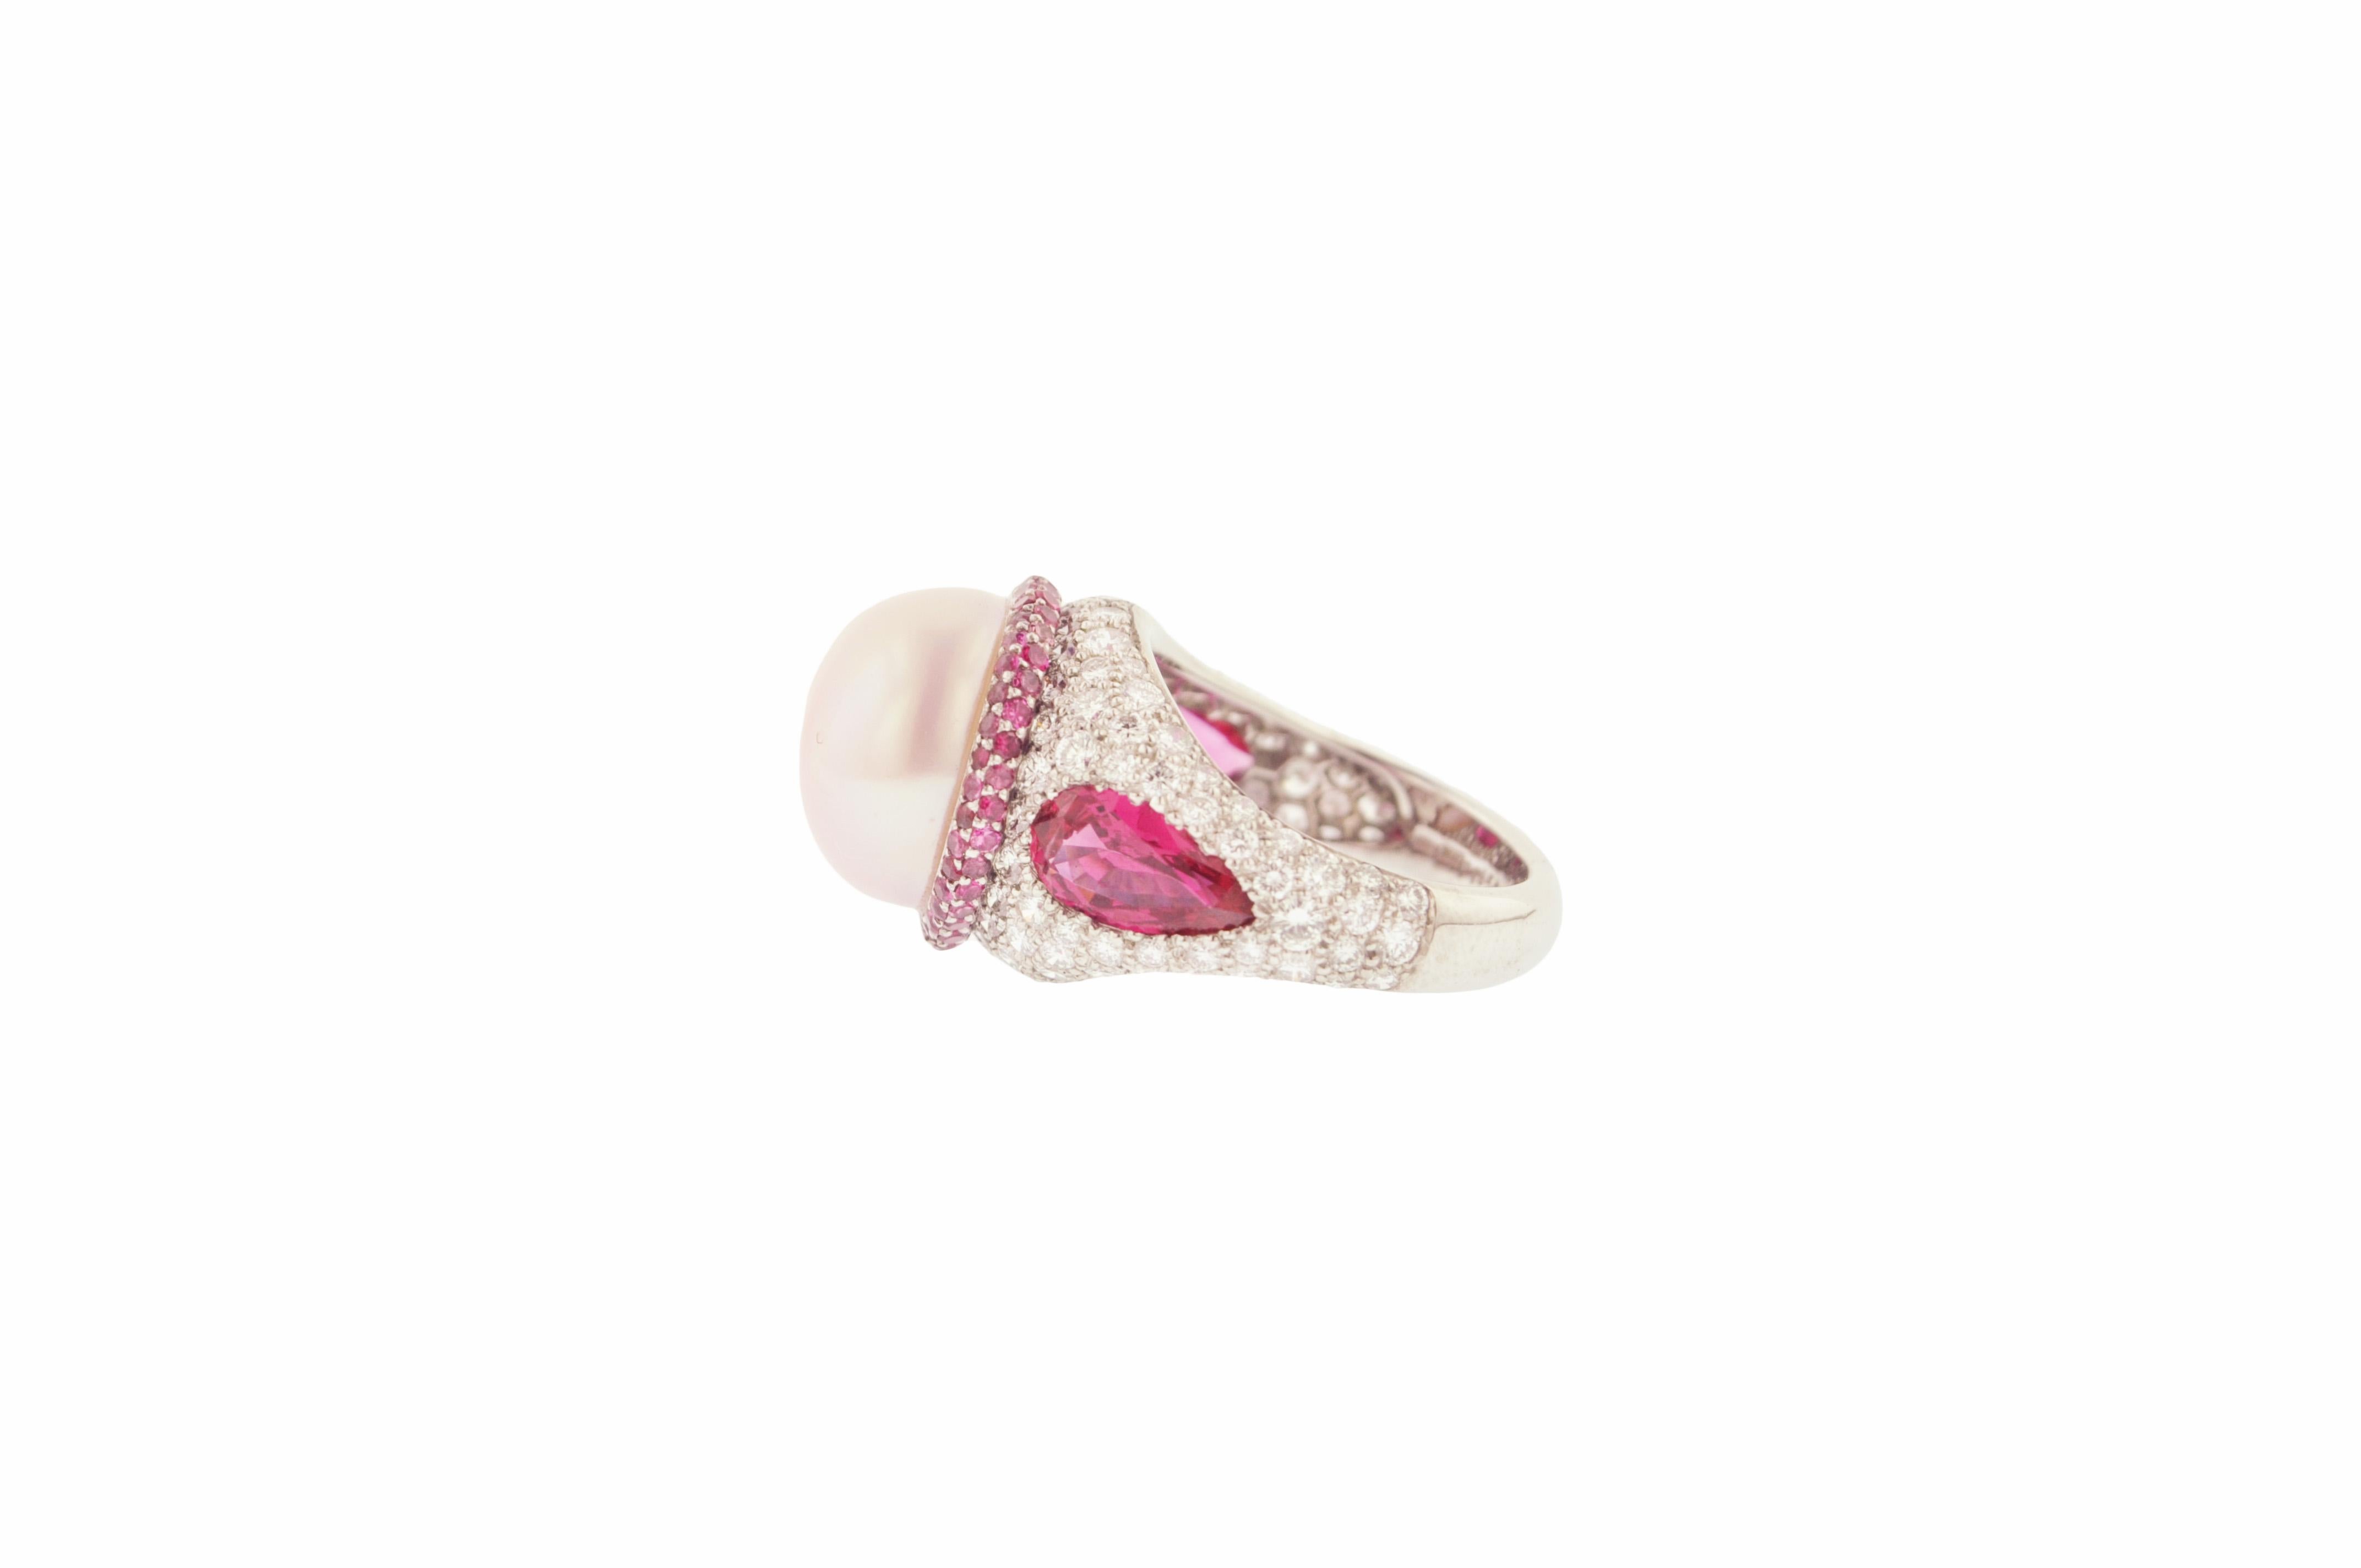 Platinum estate cocktail ring featuring a pink pearl, pair of pear shaped pinkish red spinels and diamonds.

Ring size 6 3/4